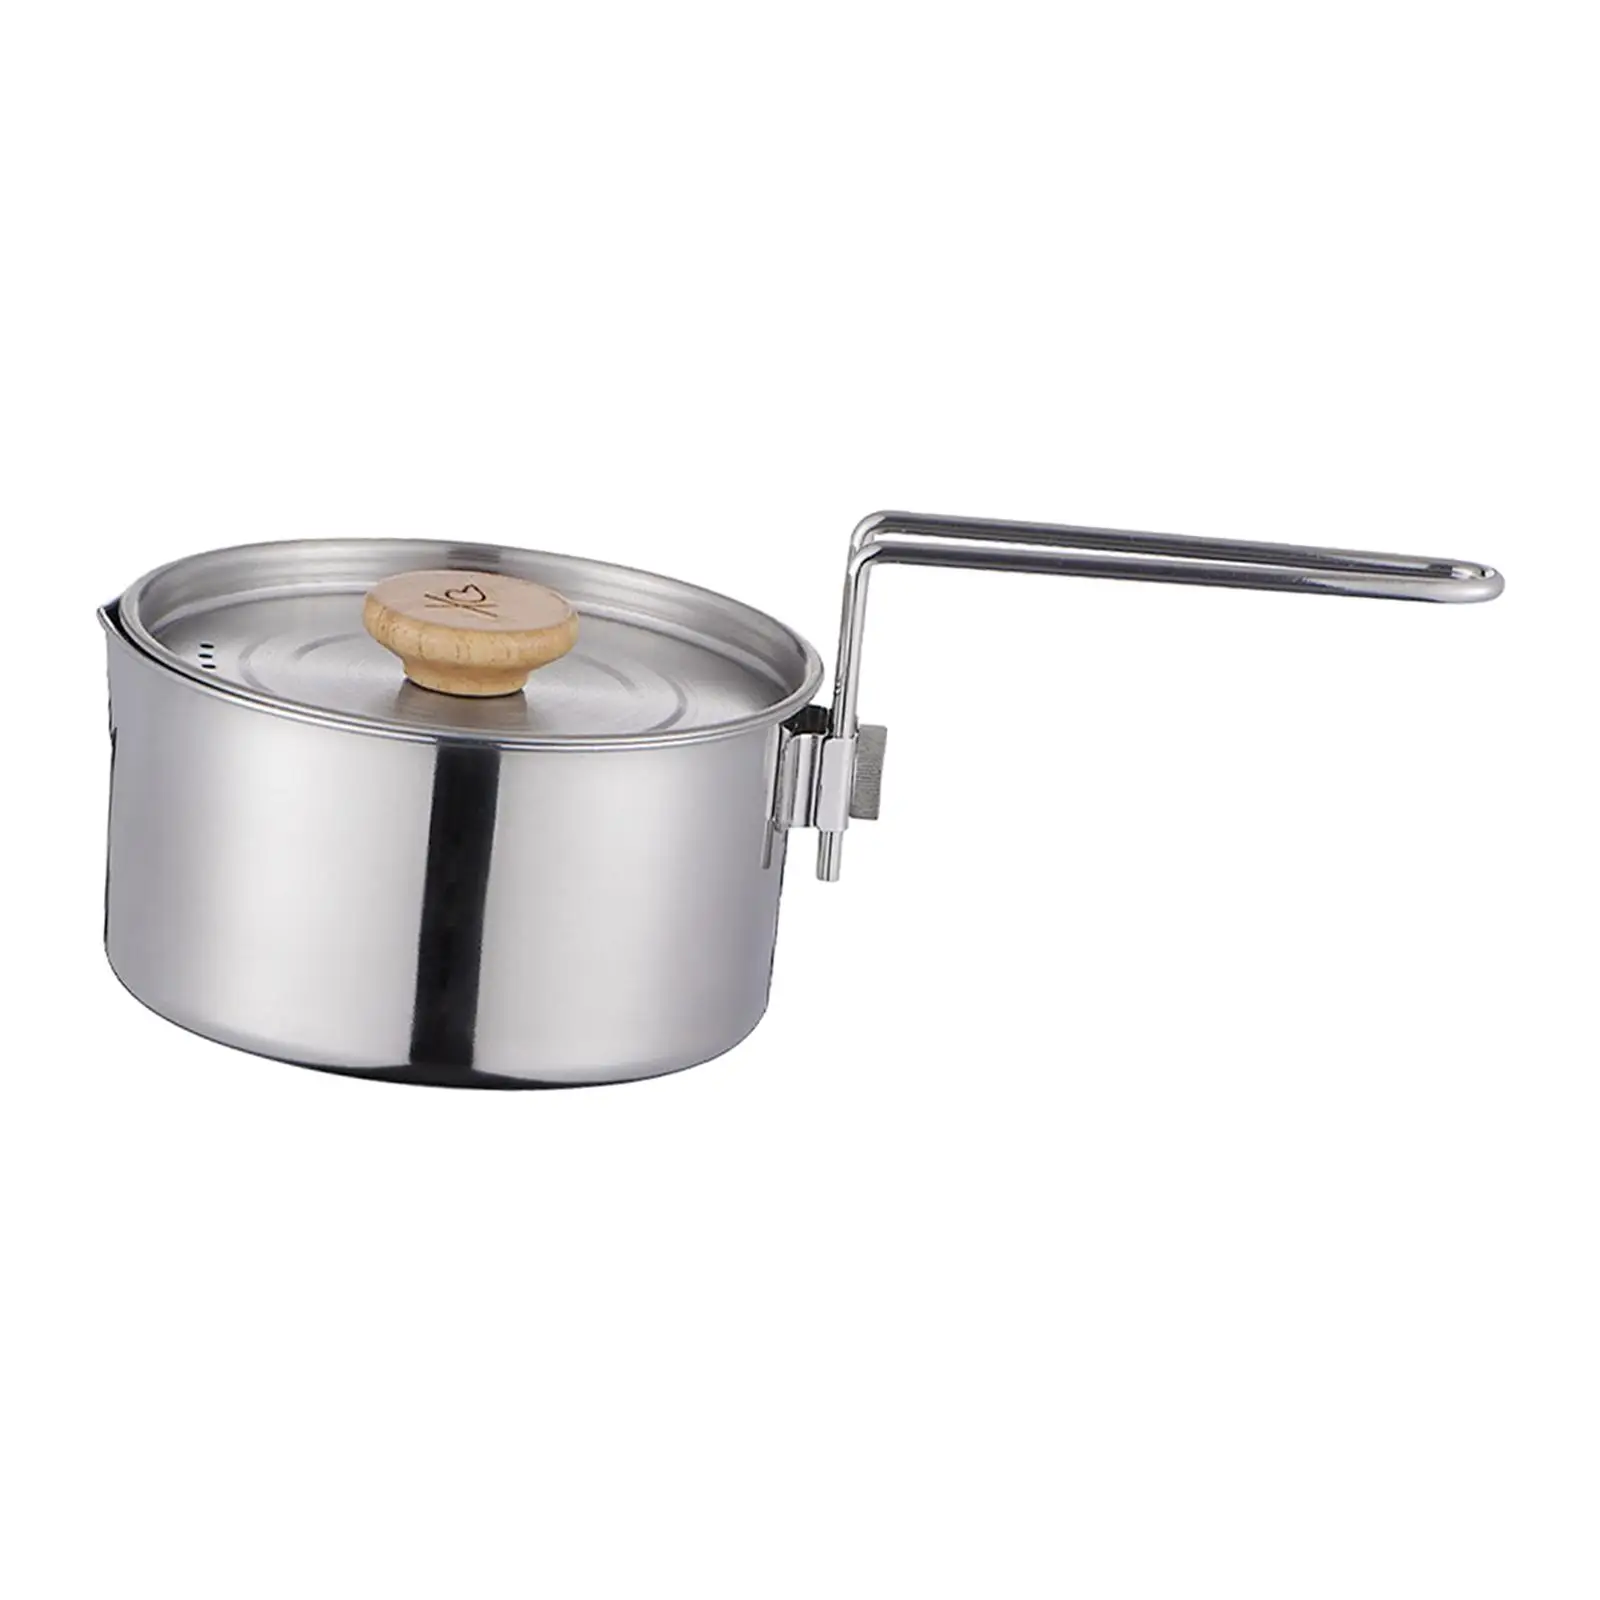 Stainless Steel Camping Pot Kettle Campfire Kettle Coffee Pot Cookware Cooking Pot for Picnic Hiking